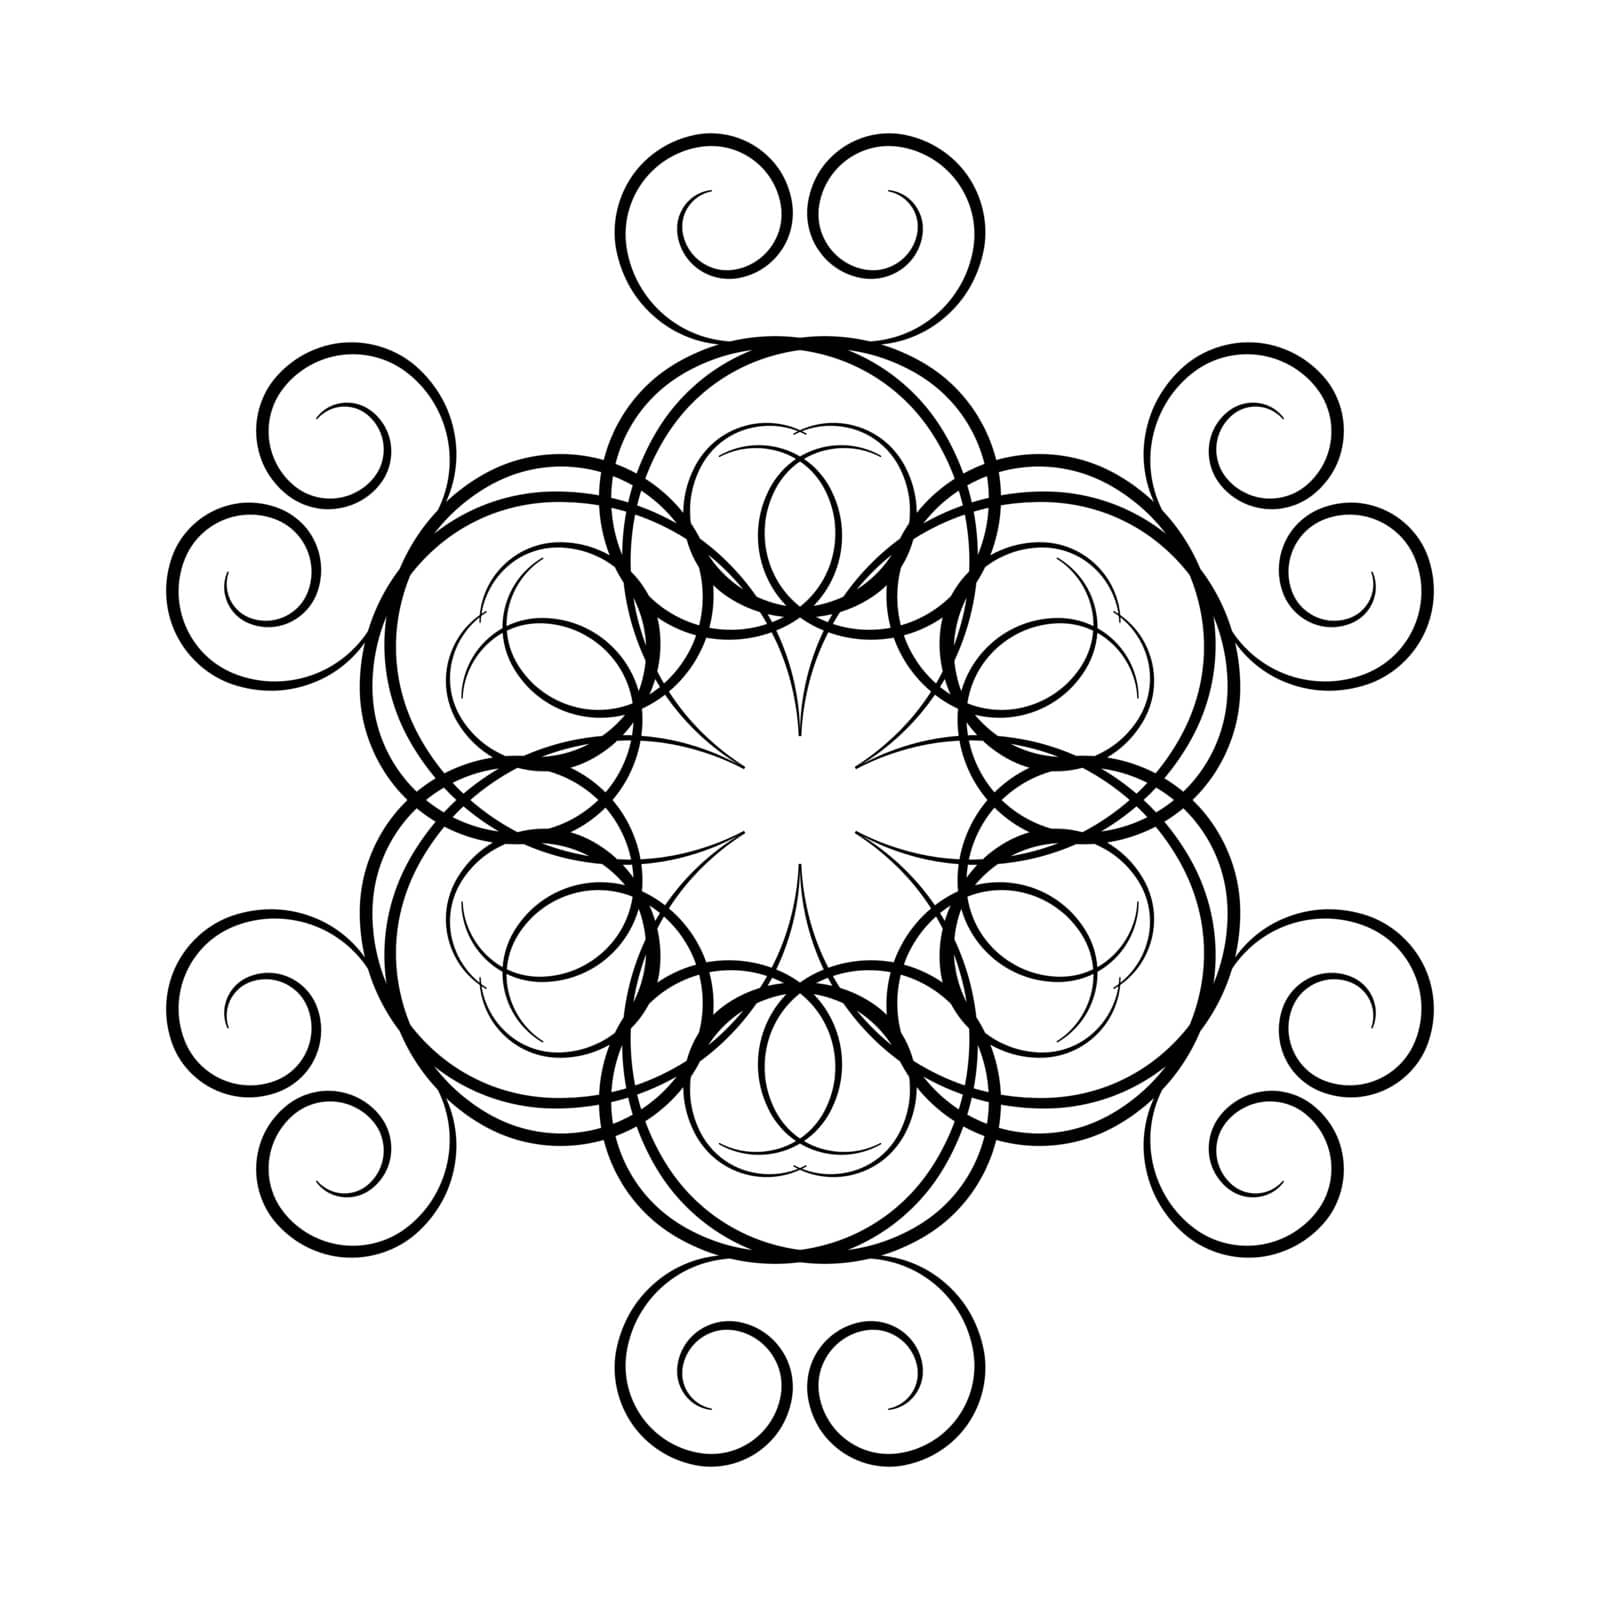 A circular ornament  of swirling lines, vector illustration.